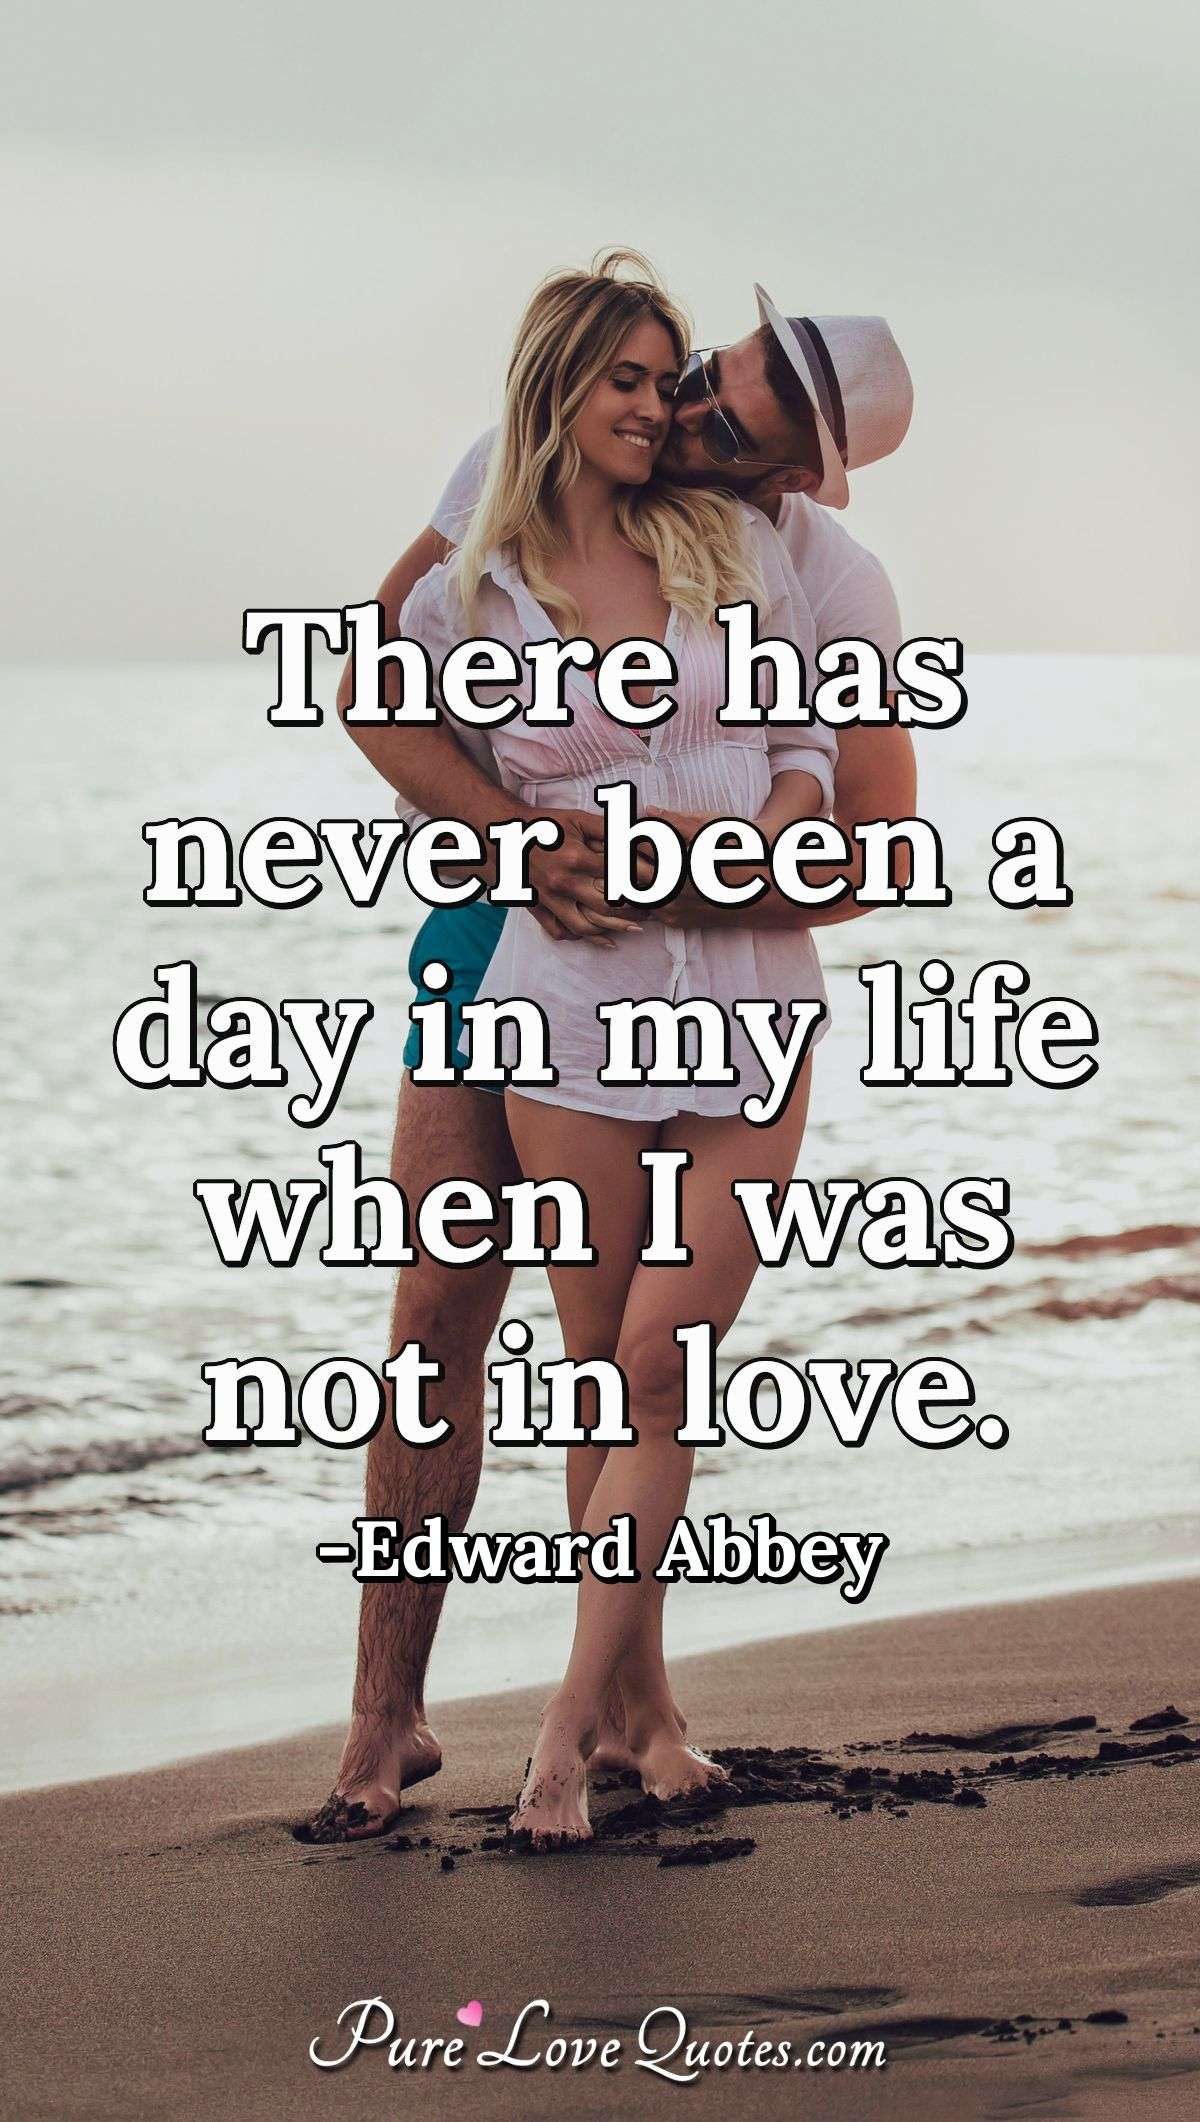 There has never been a day in my life when I was not in love. - Edward Abbey